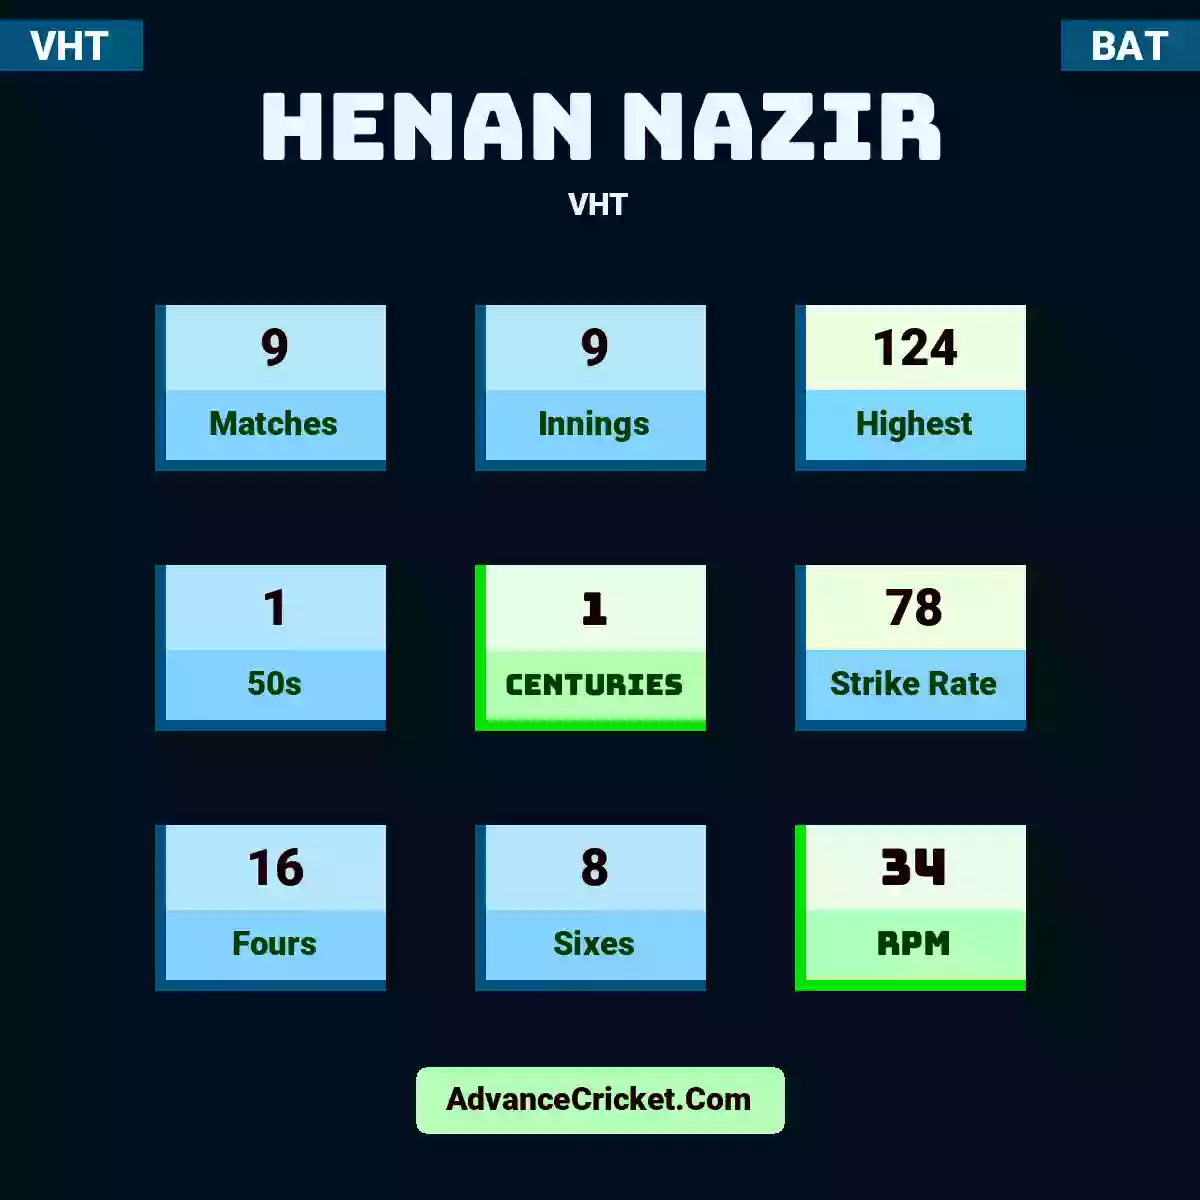 Henan Nazir VHT , Henan Nazir played 9 matches, scored 124 runs as highest, 1 half-centuries, and 1 centuries, with a strike rate of 78. H.Nazir hit 16 fours and 8 sixes, with an RPM of 34.